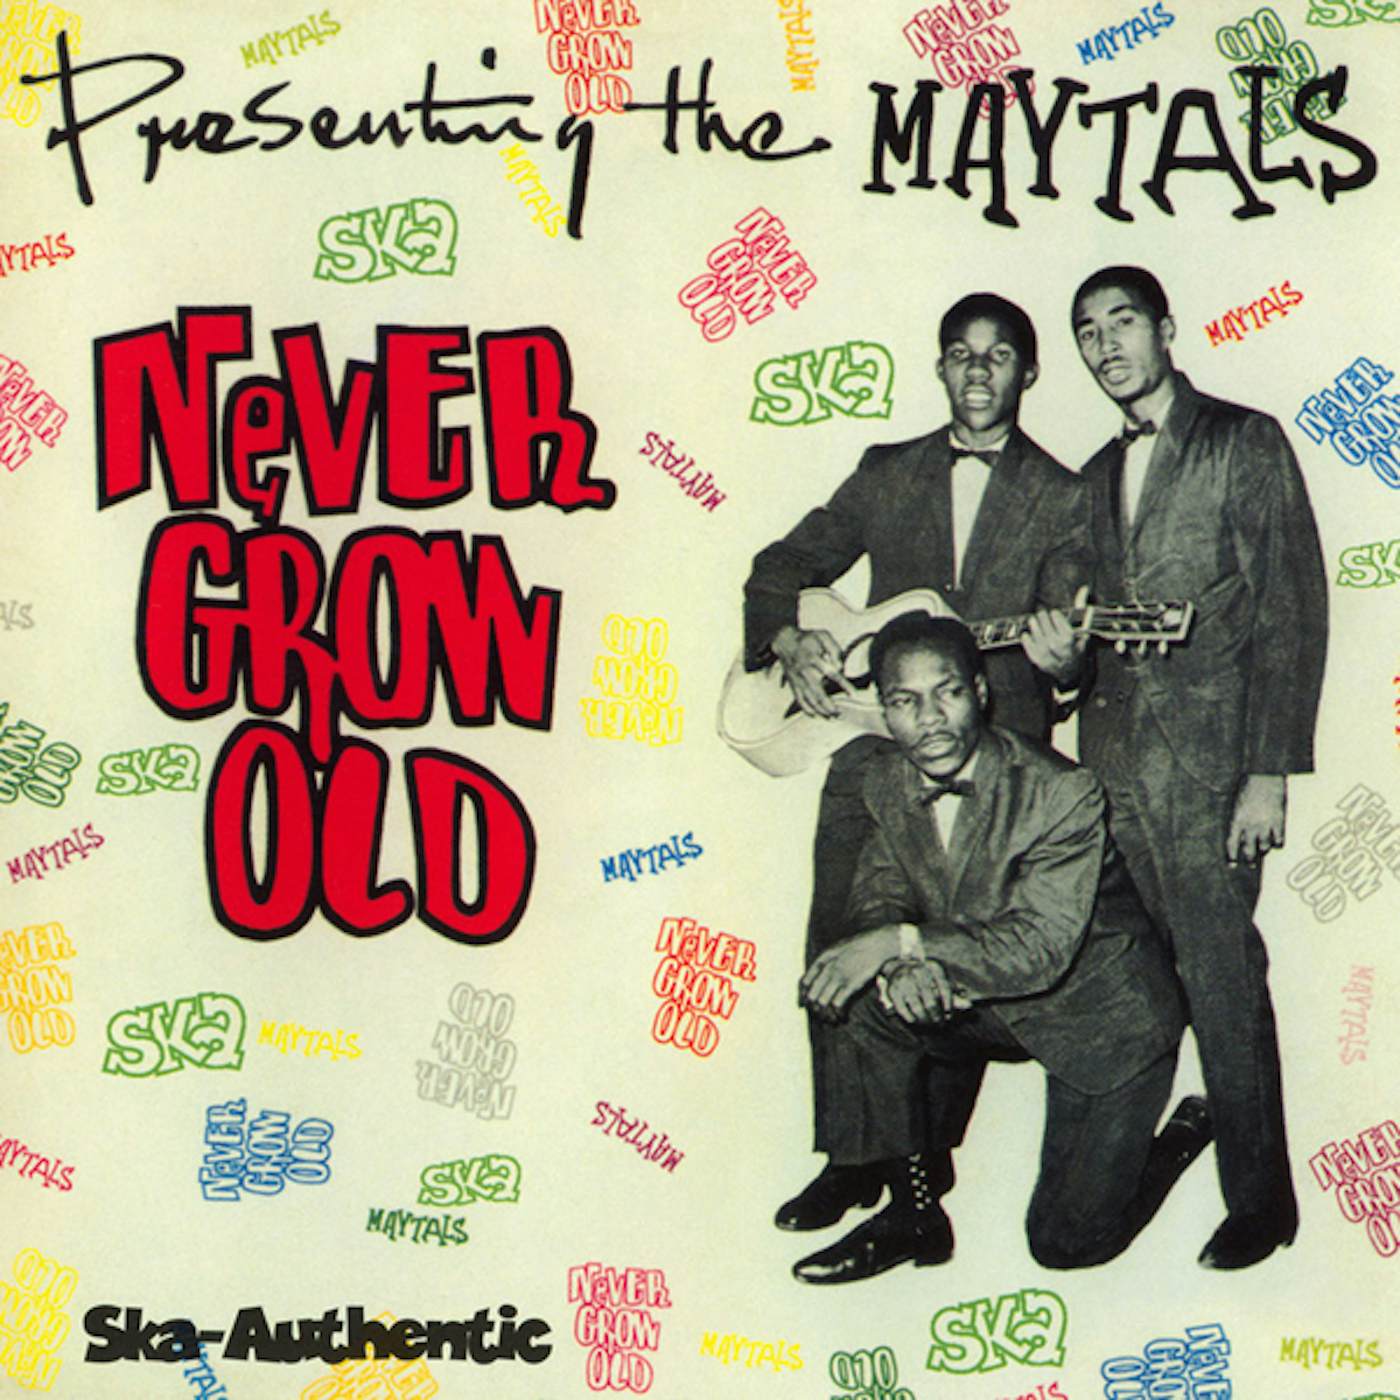 The Maytals NEVER GROW OLD CD